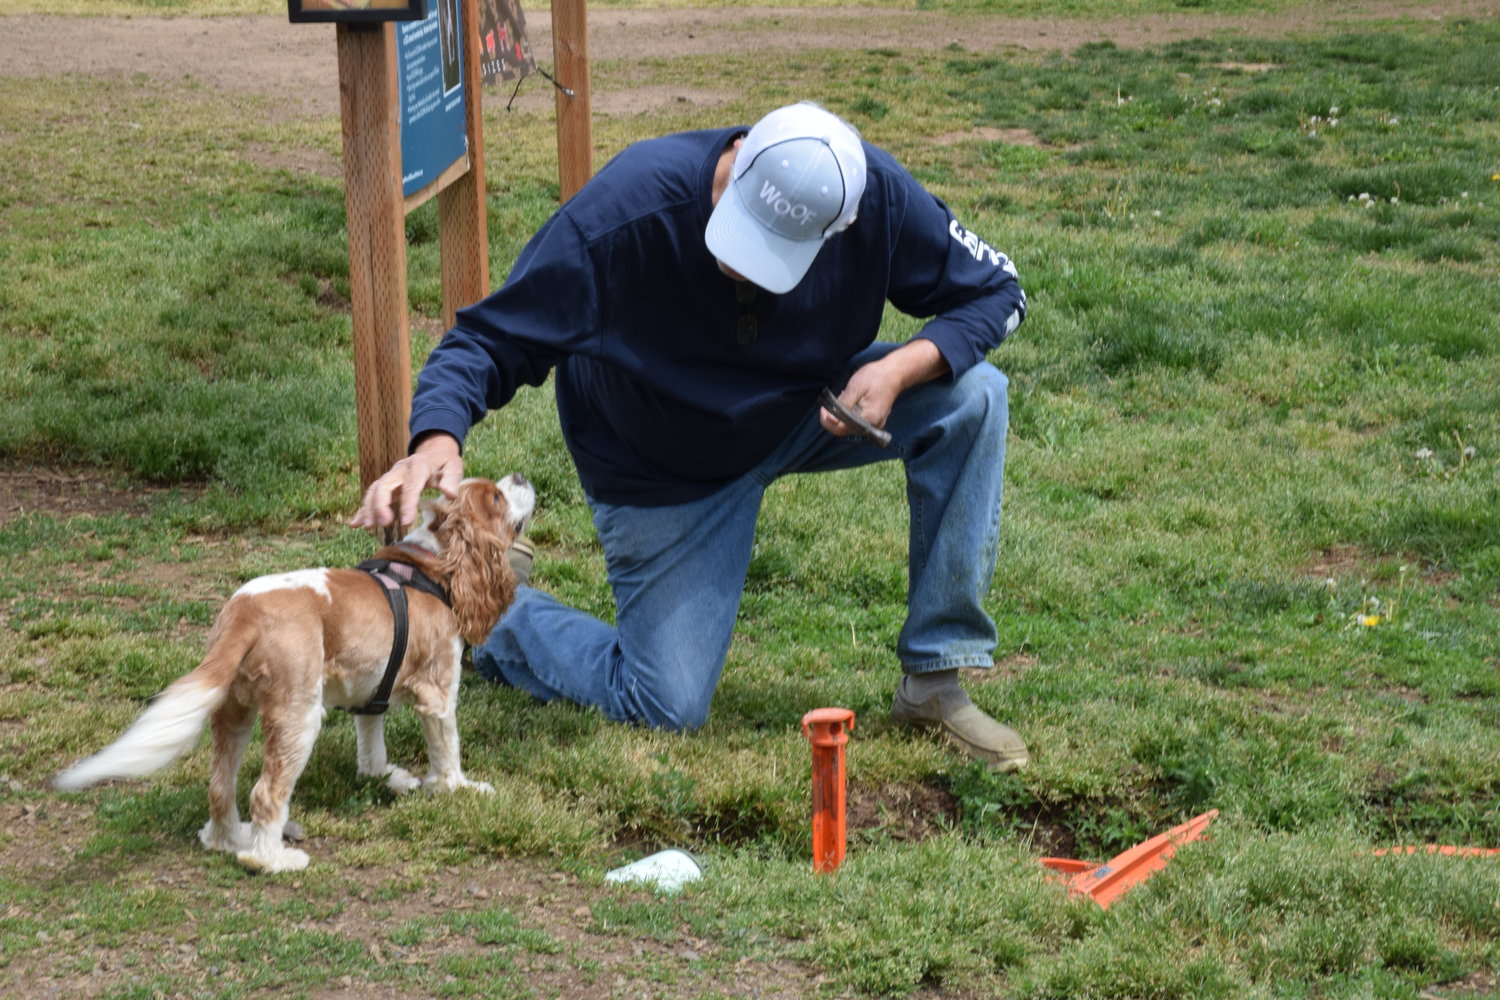 DOGPAW Park Operations Director Marty Rutkovitz greets Chauncey during a cleanup event at Lucky Dog Park in Brush Prairie May 8.